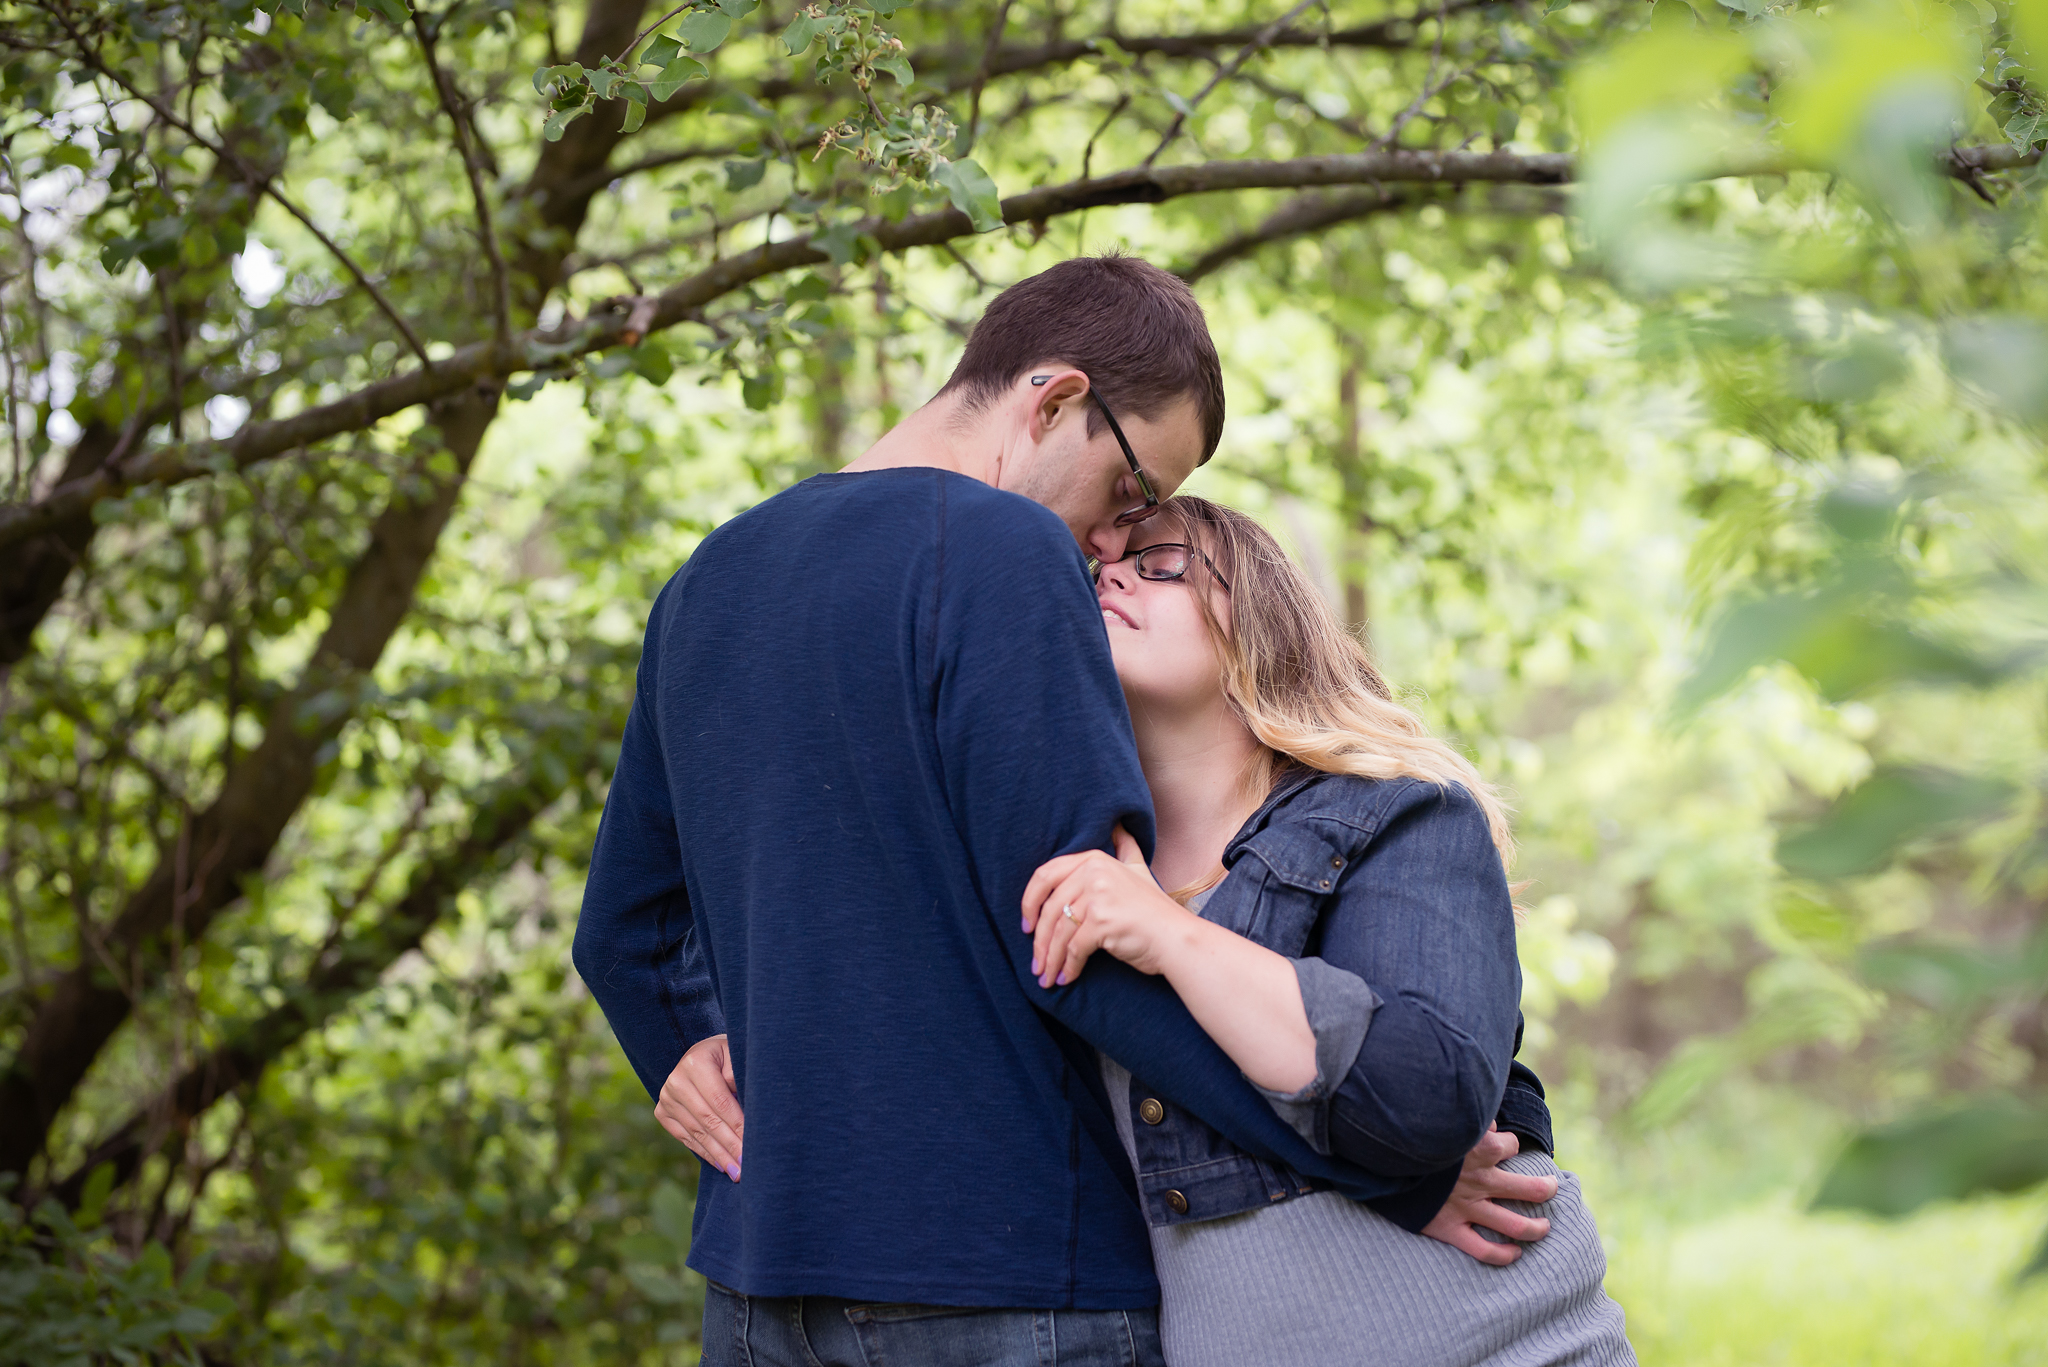 Couples202NaomiLuciennePhotography062018-2-Edit.jpg